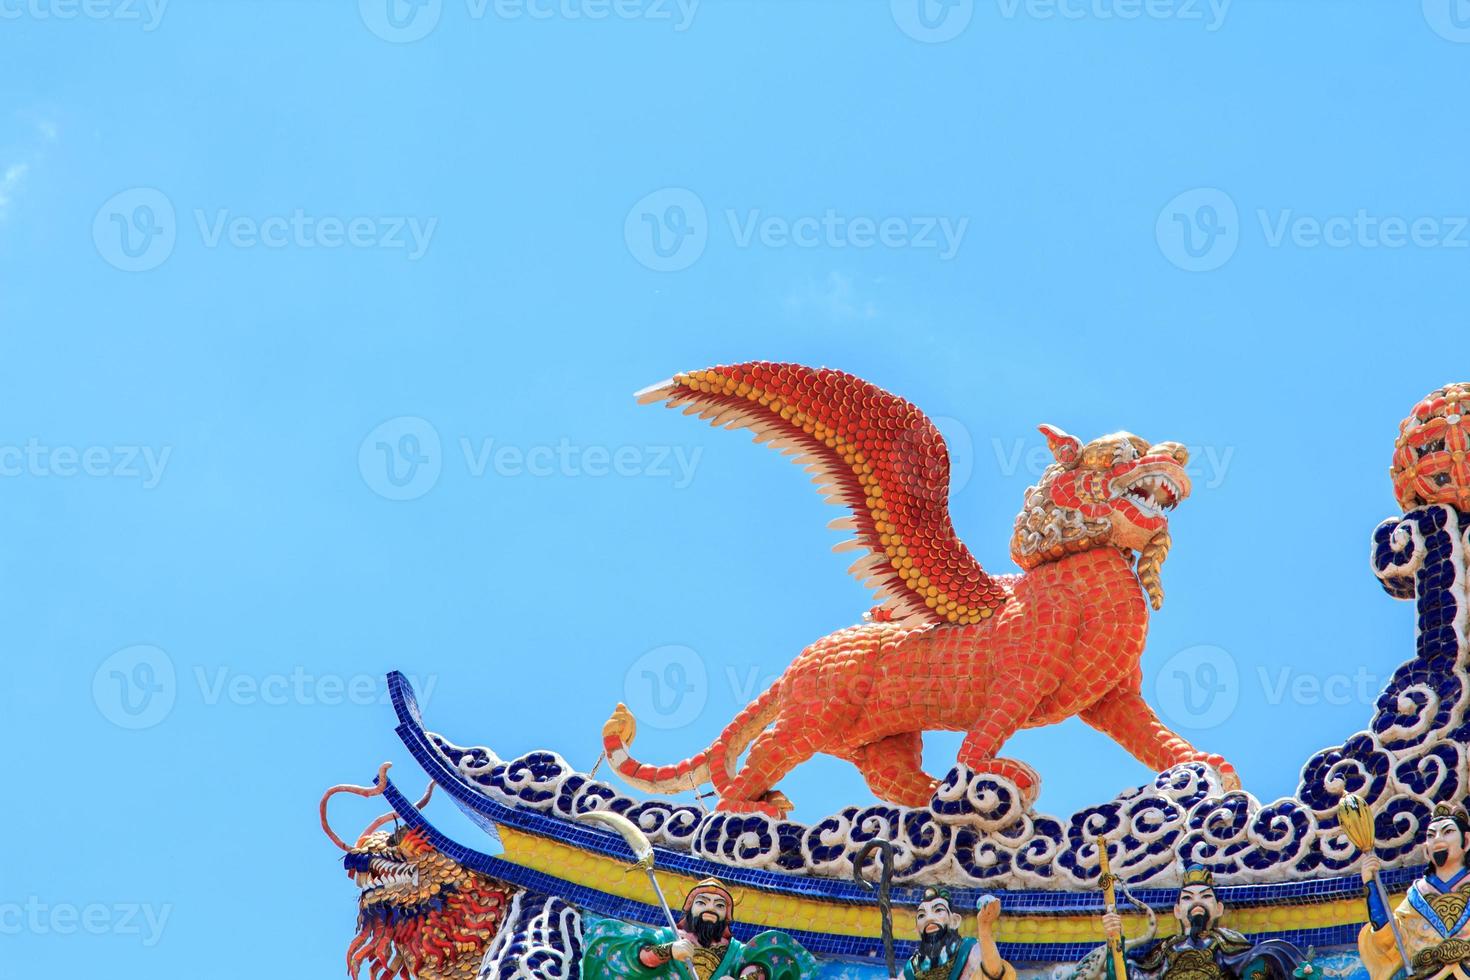 Flying tiger statues, a mythical animal in Chinese literature, are often decorated in temples and on the roof as beautiful sculptures. photo